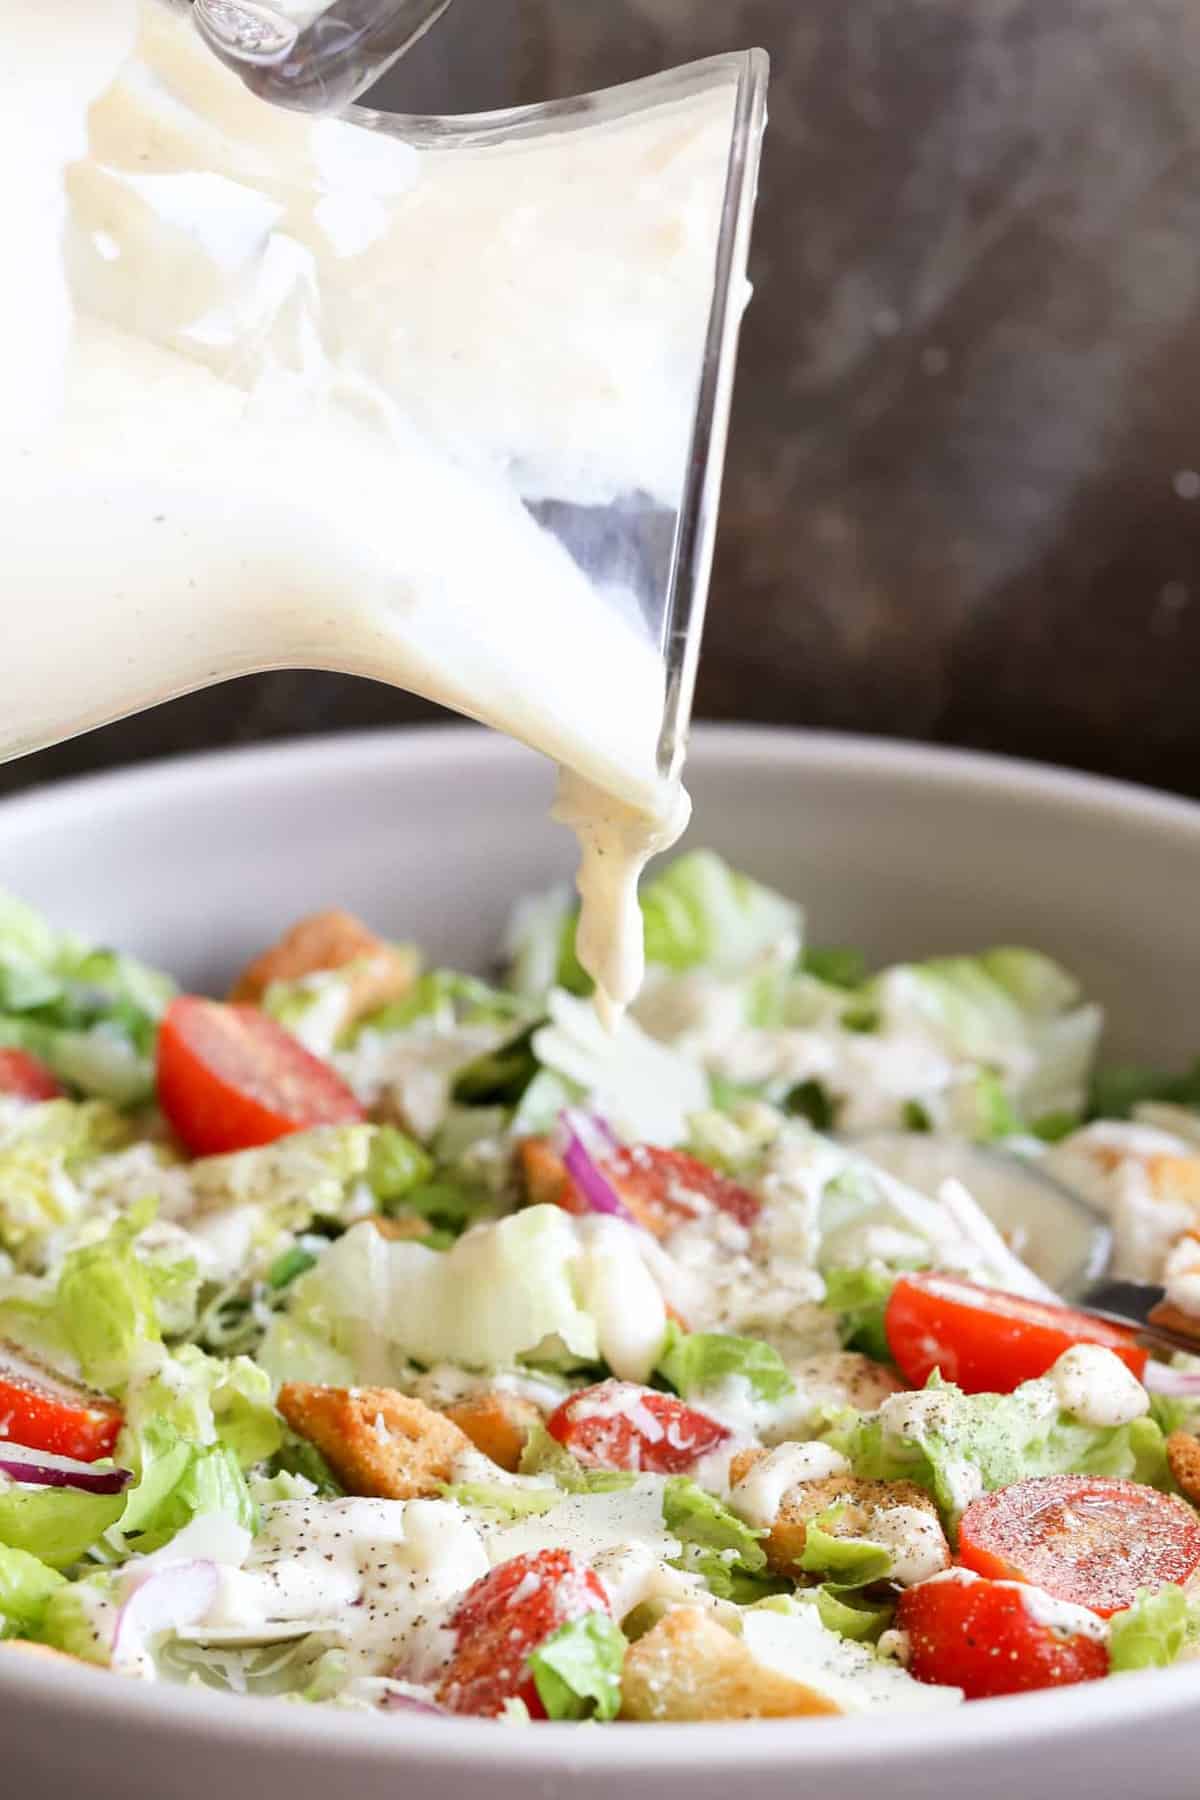 Caesar salad dressing pouring into salad bowl that is loaded with lettuce, tomatoes, croutons, and onions.